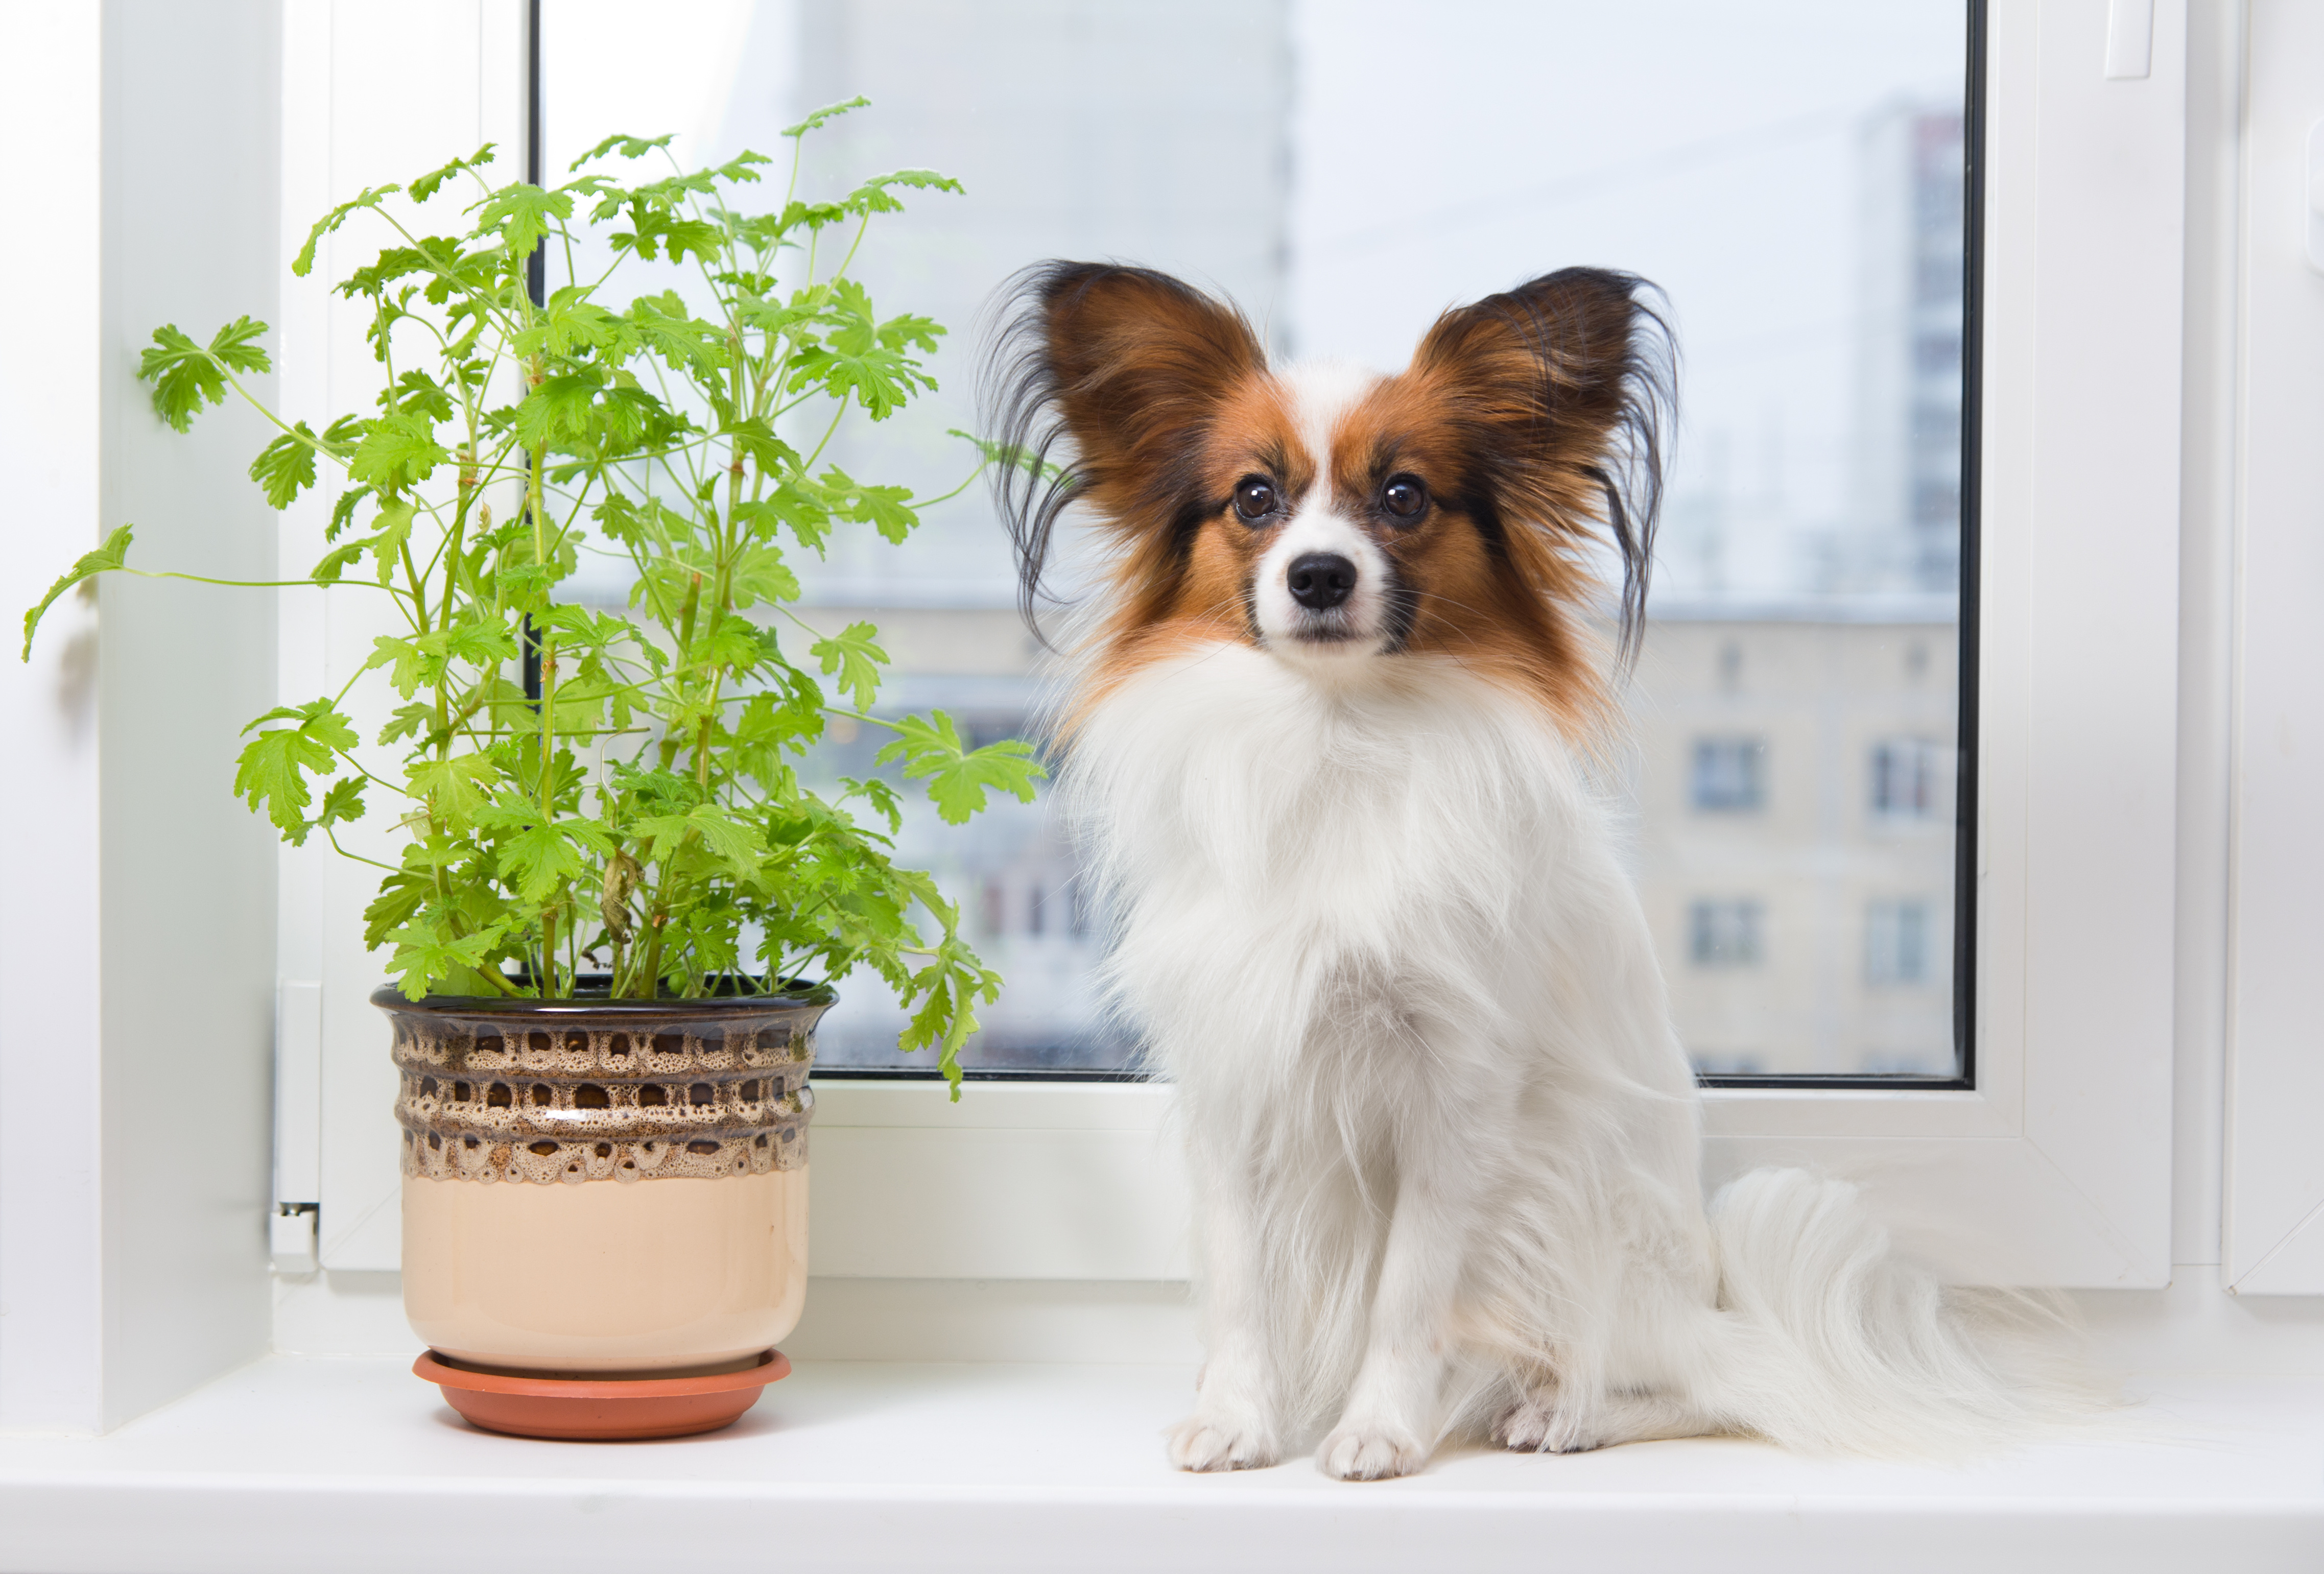 dog-and-flower-on-window-sill